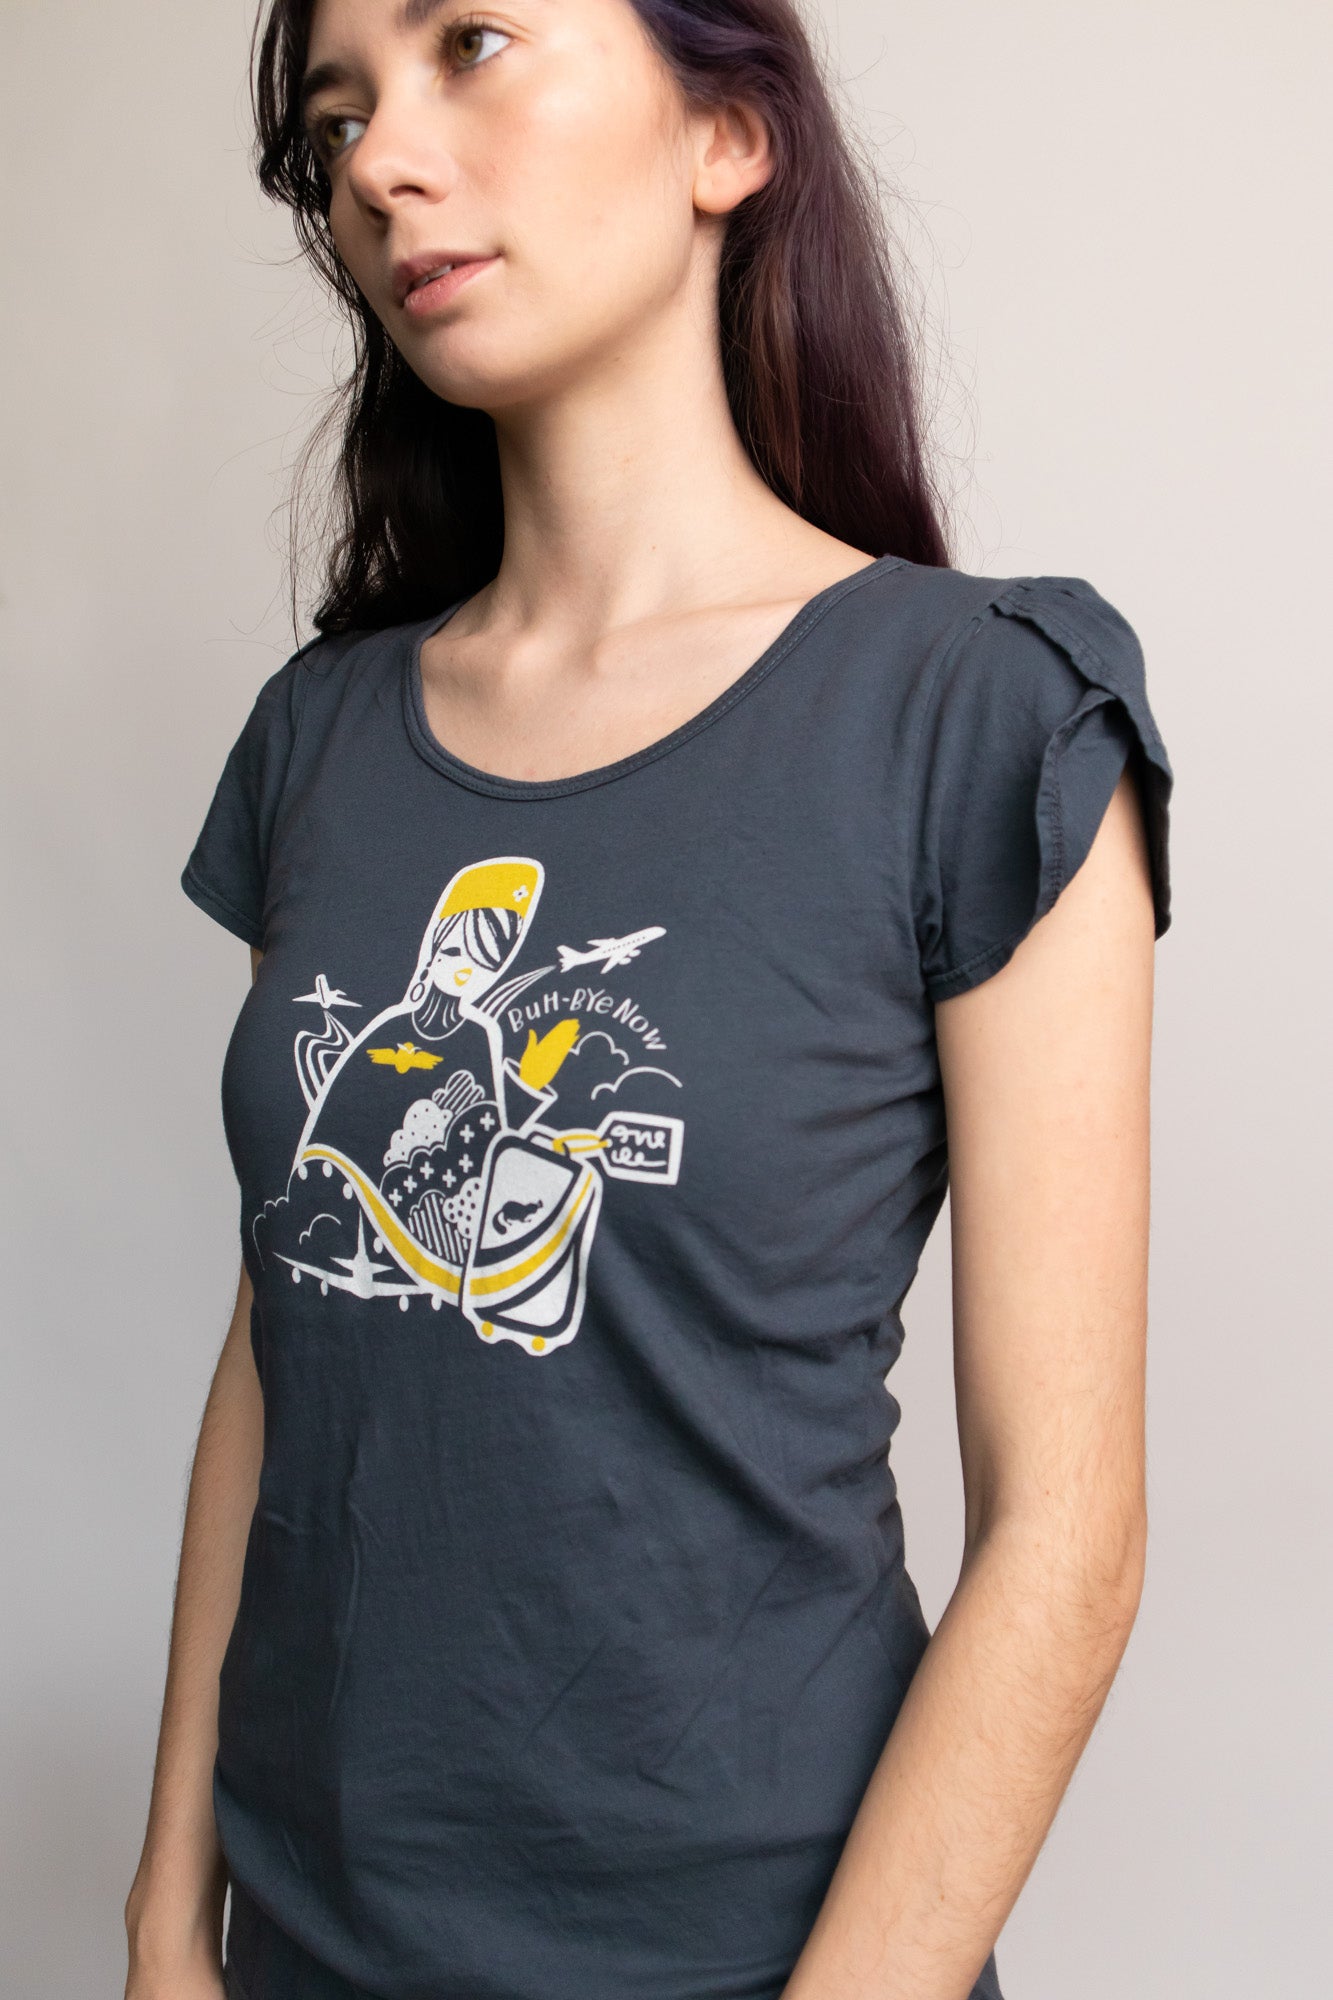 Dark grey shirt with stewardess print and text reading "Buh-bye, now" on model